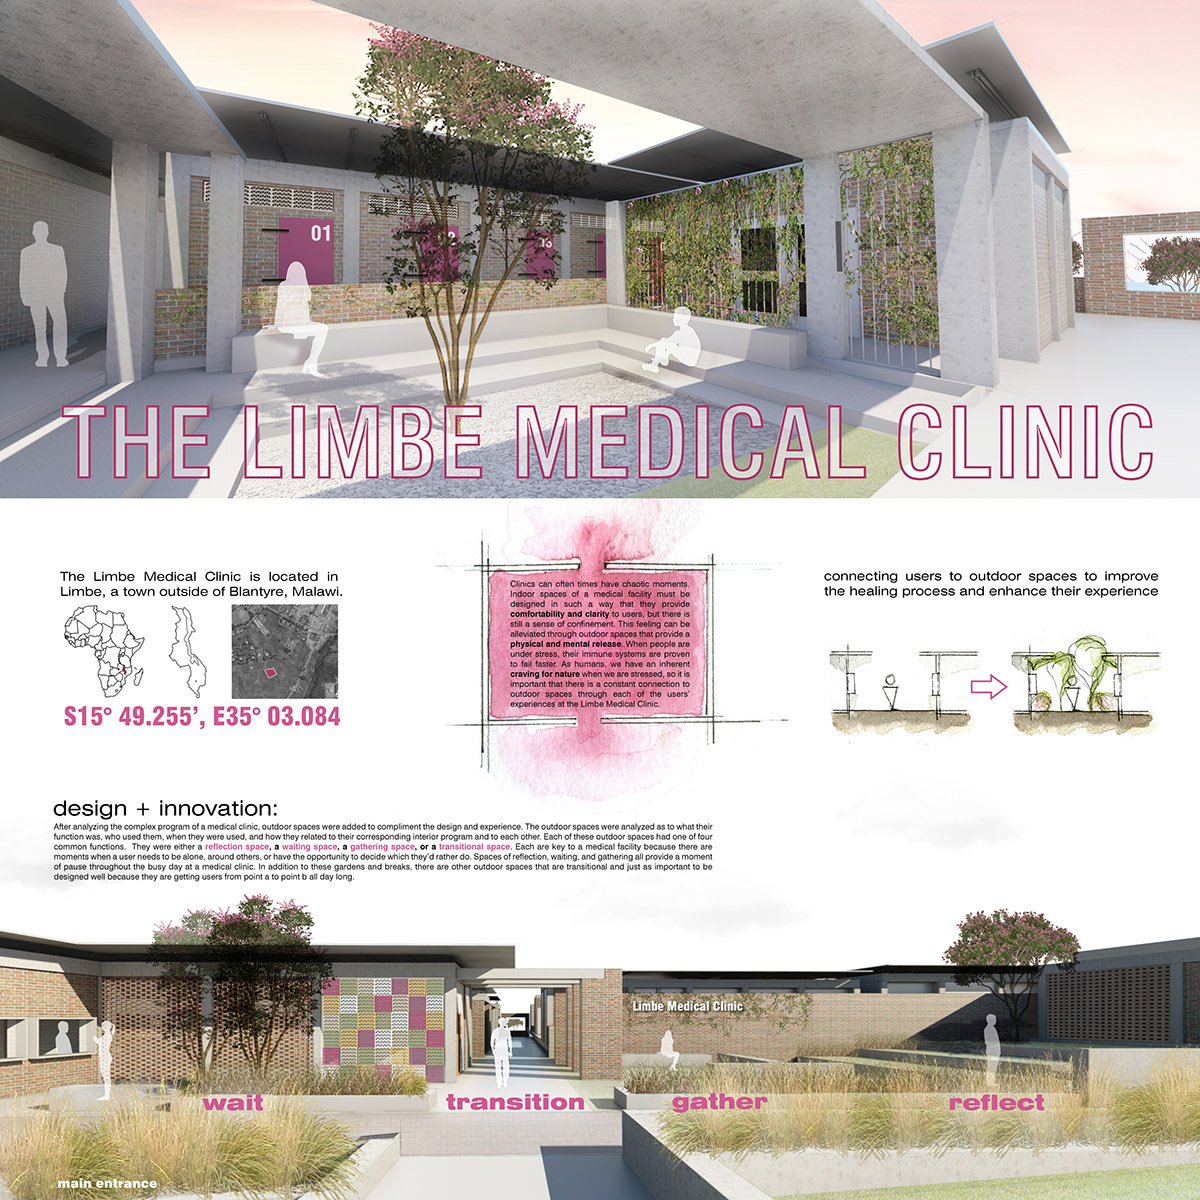 Competition Limbe Medical Clinic